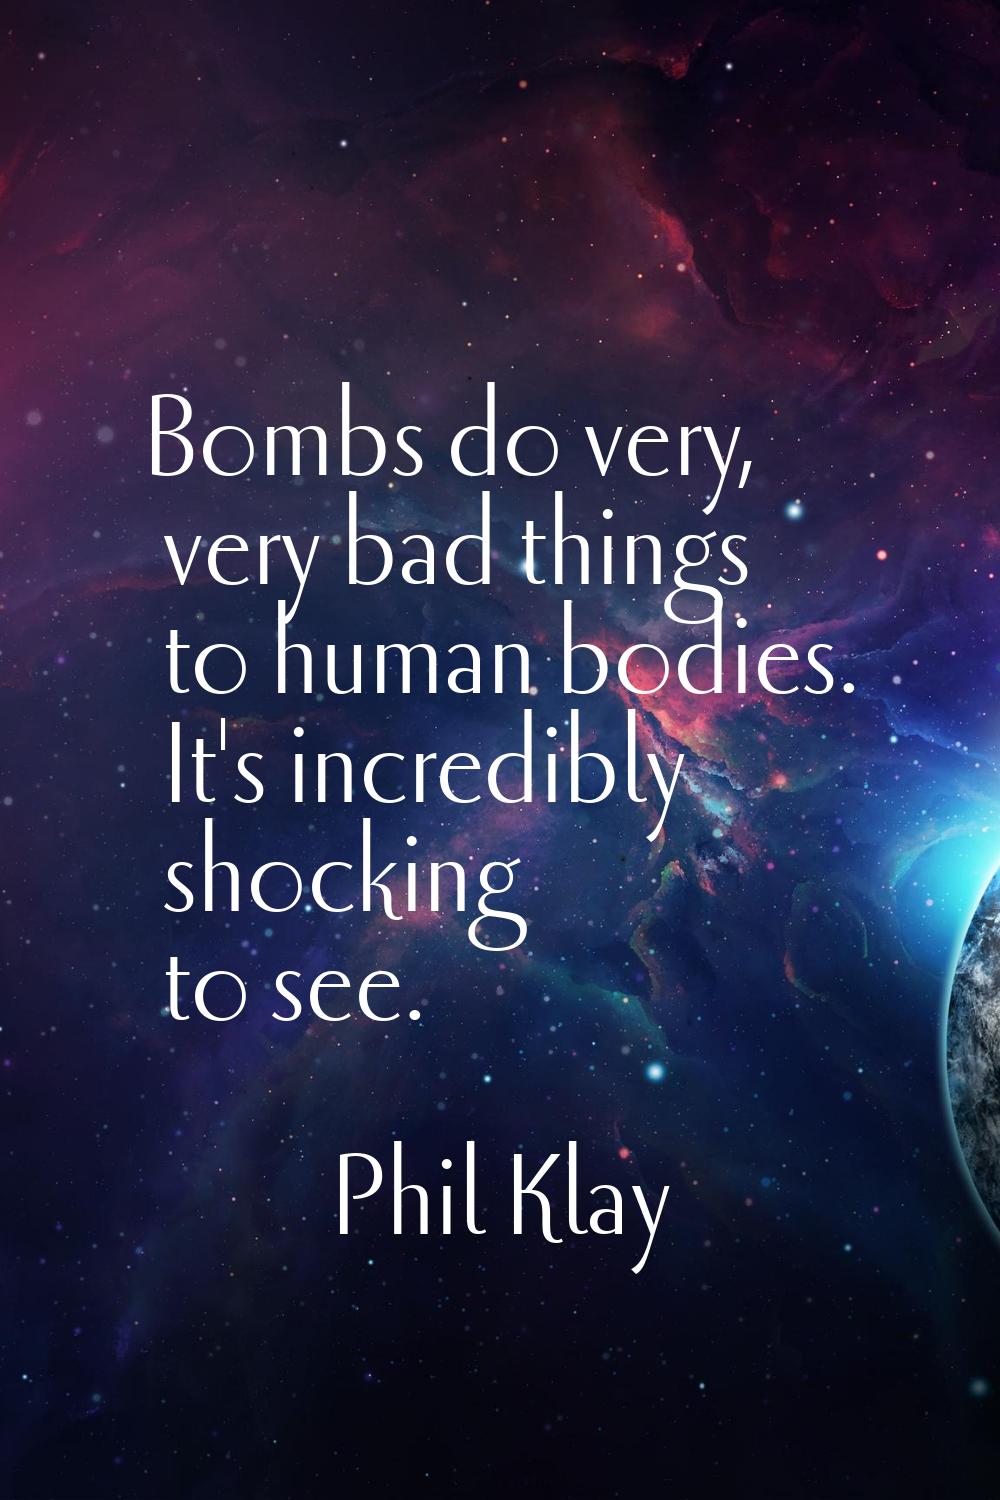 Bombs do very, very bad things to human bodies. It's incredibly shocking to see.